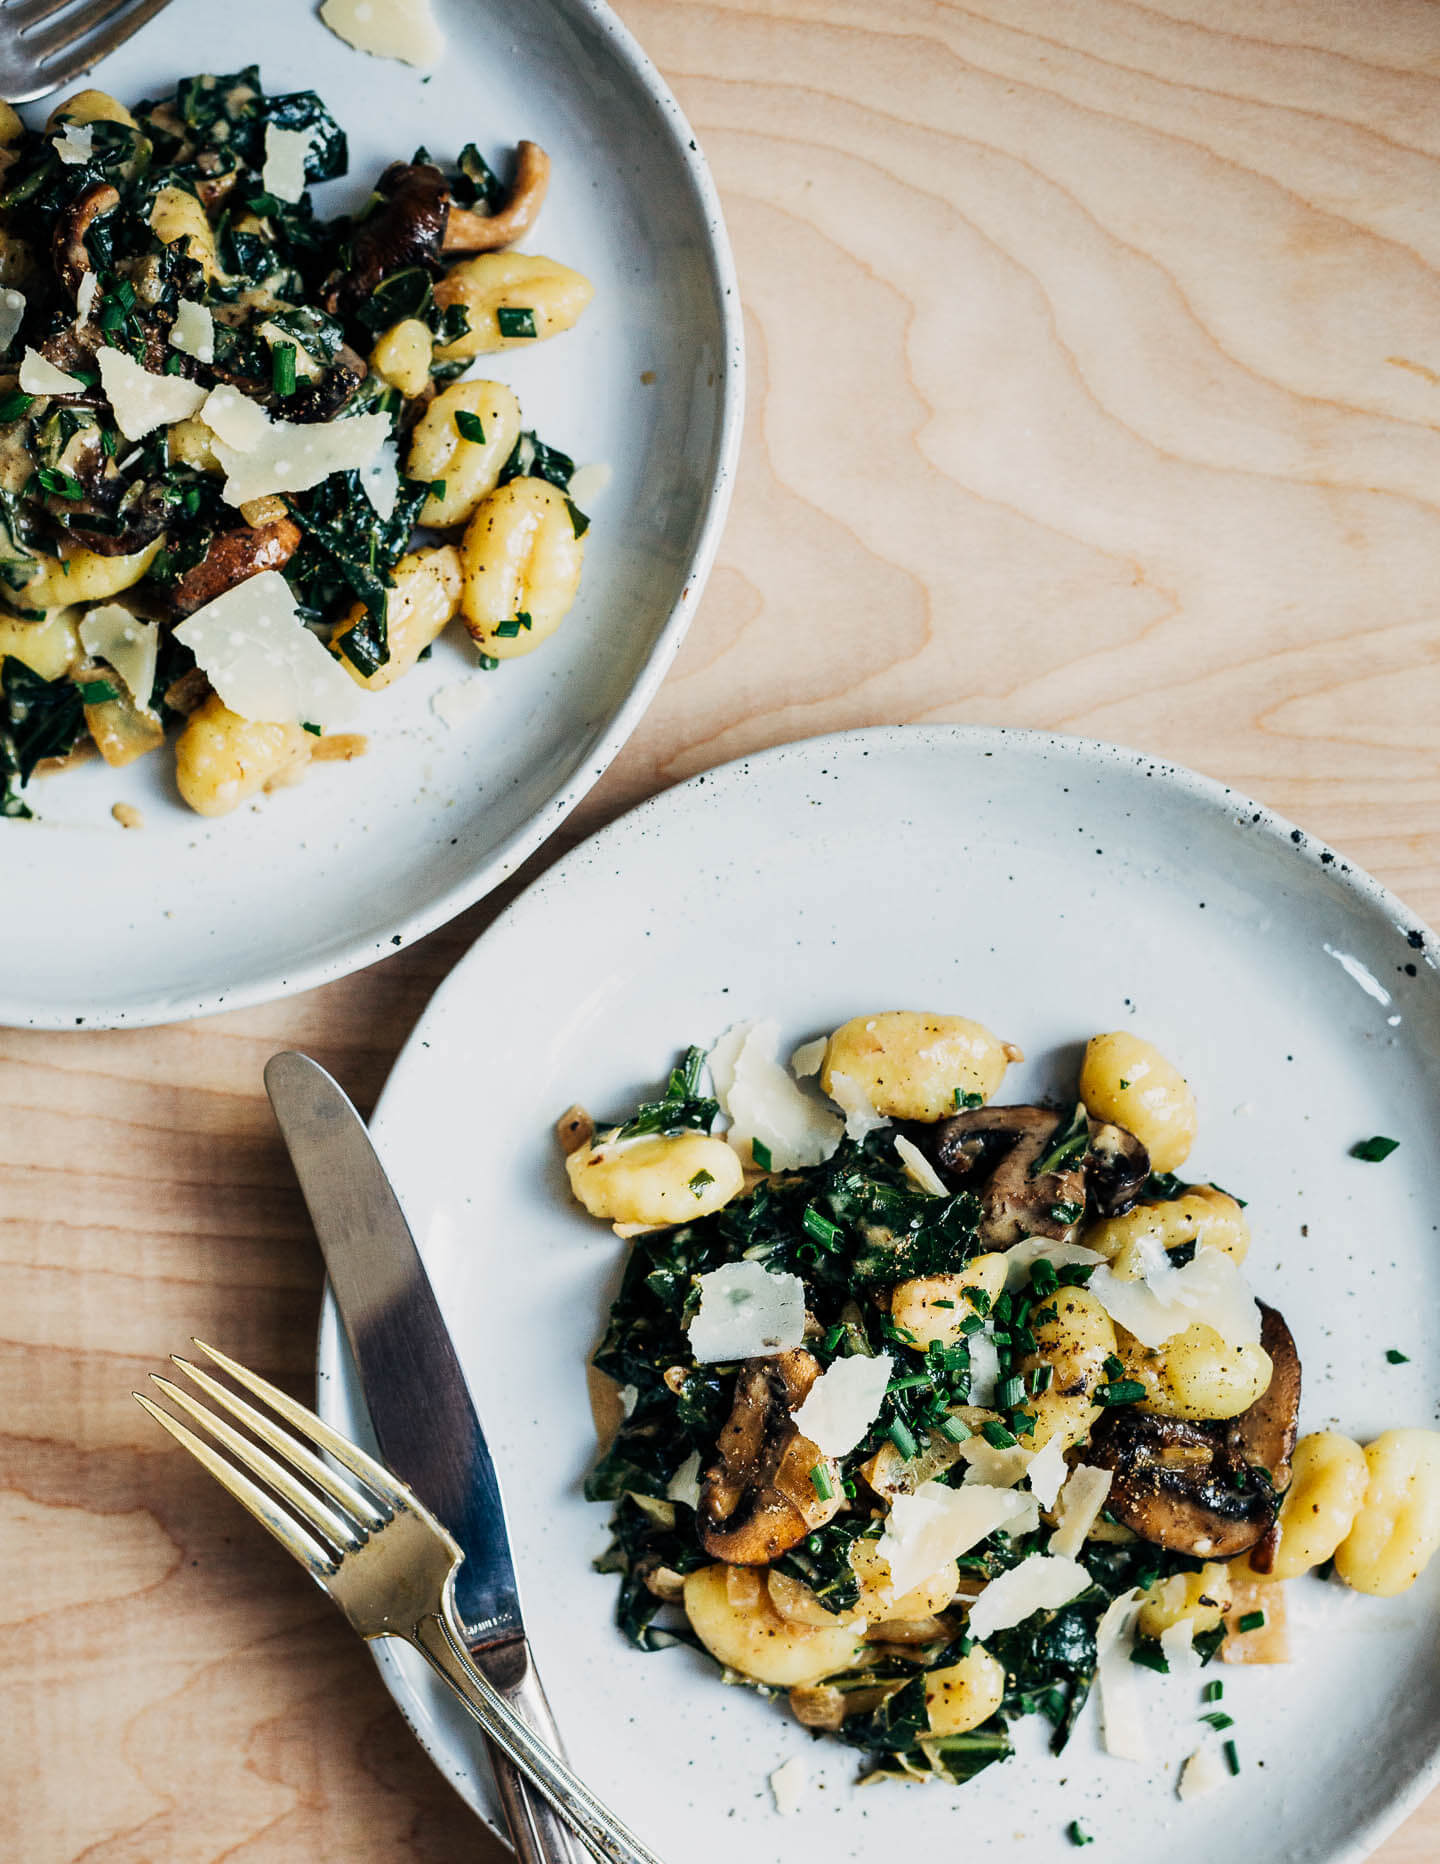 A weeknight recipe with showoff vibes, this creamy mushroom and greens gnocchi features umami-rich mushrooms, tender collard greens, and pillowy gnocchi in a velvety Parmesan and cream sauce. 